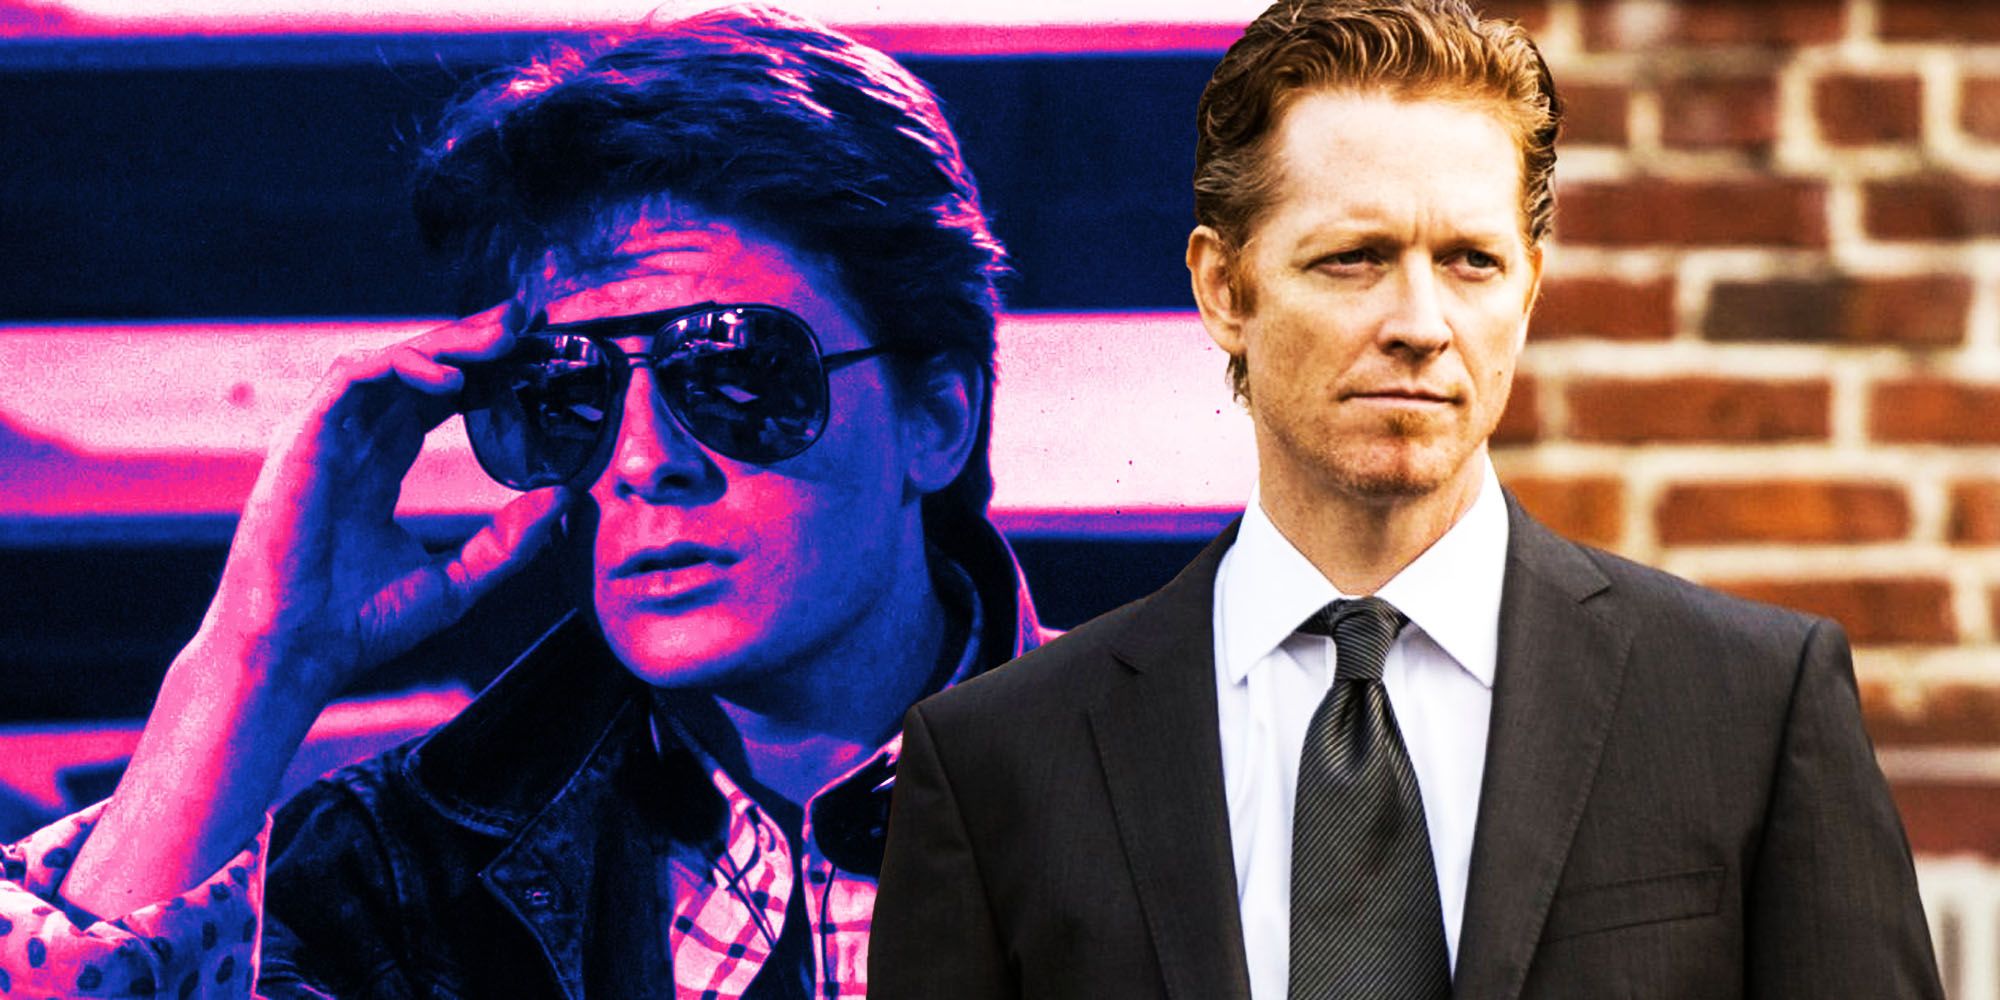 Eric Stoltz since being fired from Back to the future